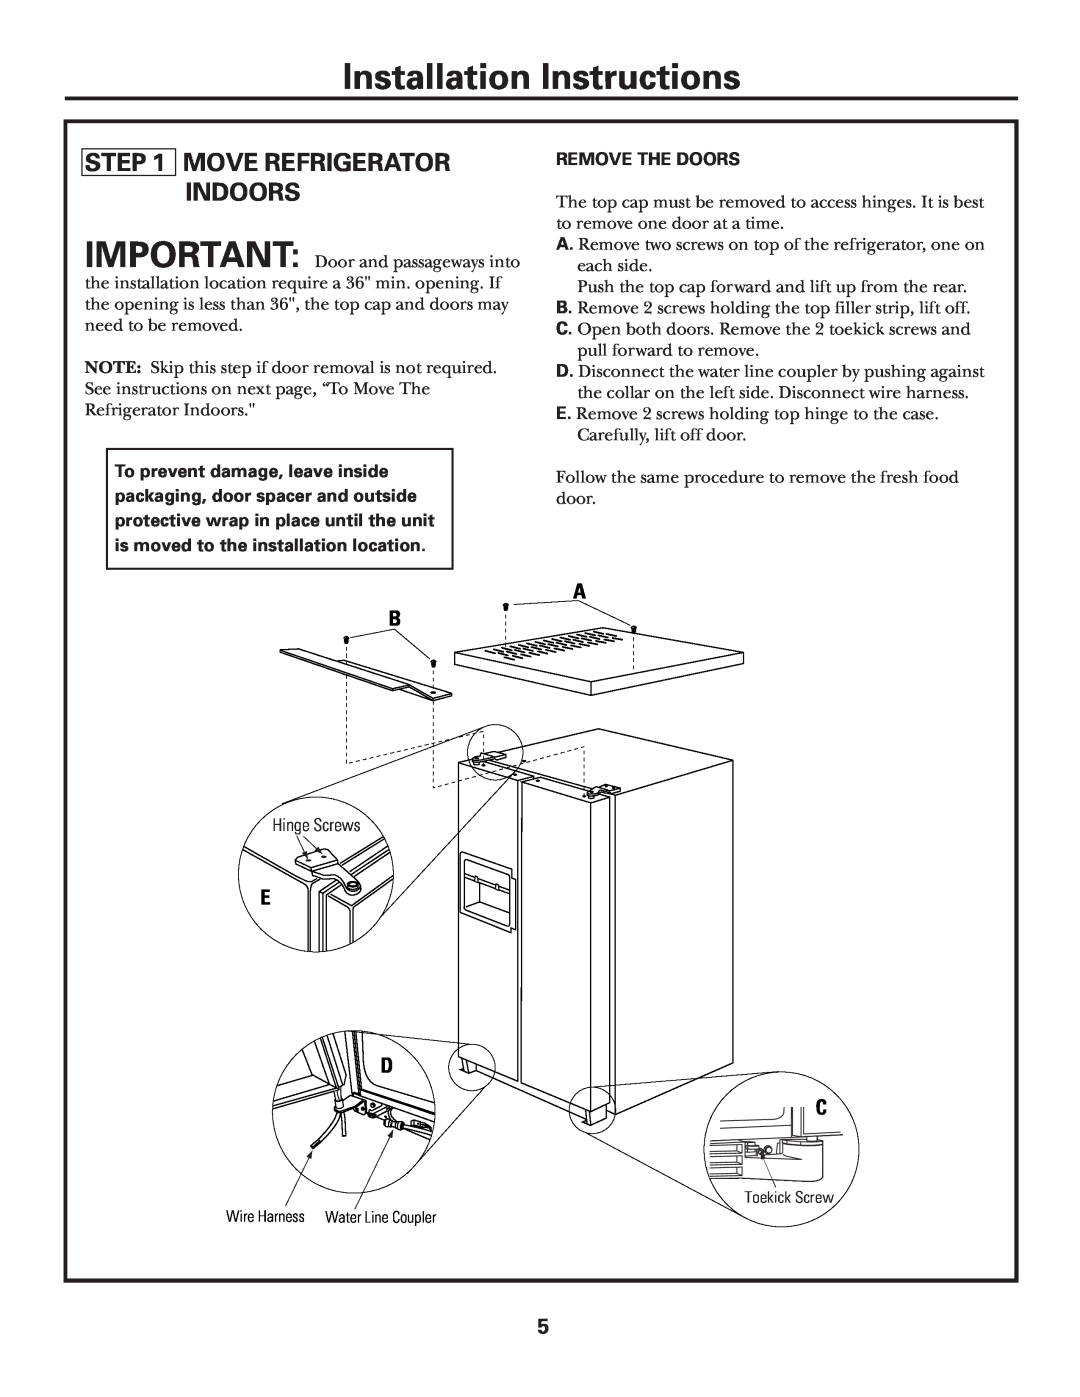 GE ZFSB23D SS installation instructions Move Refrigerator Indoors, E D C, Remove The Doors, Installation Instructions 